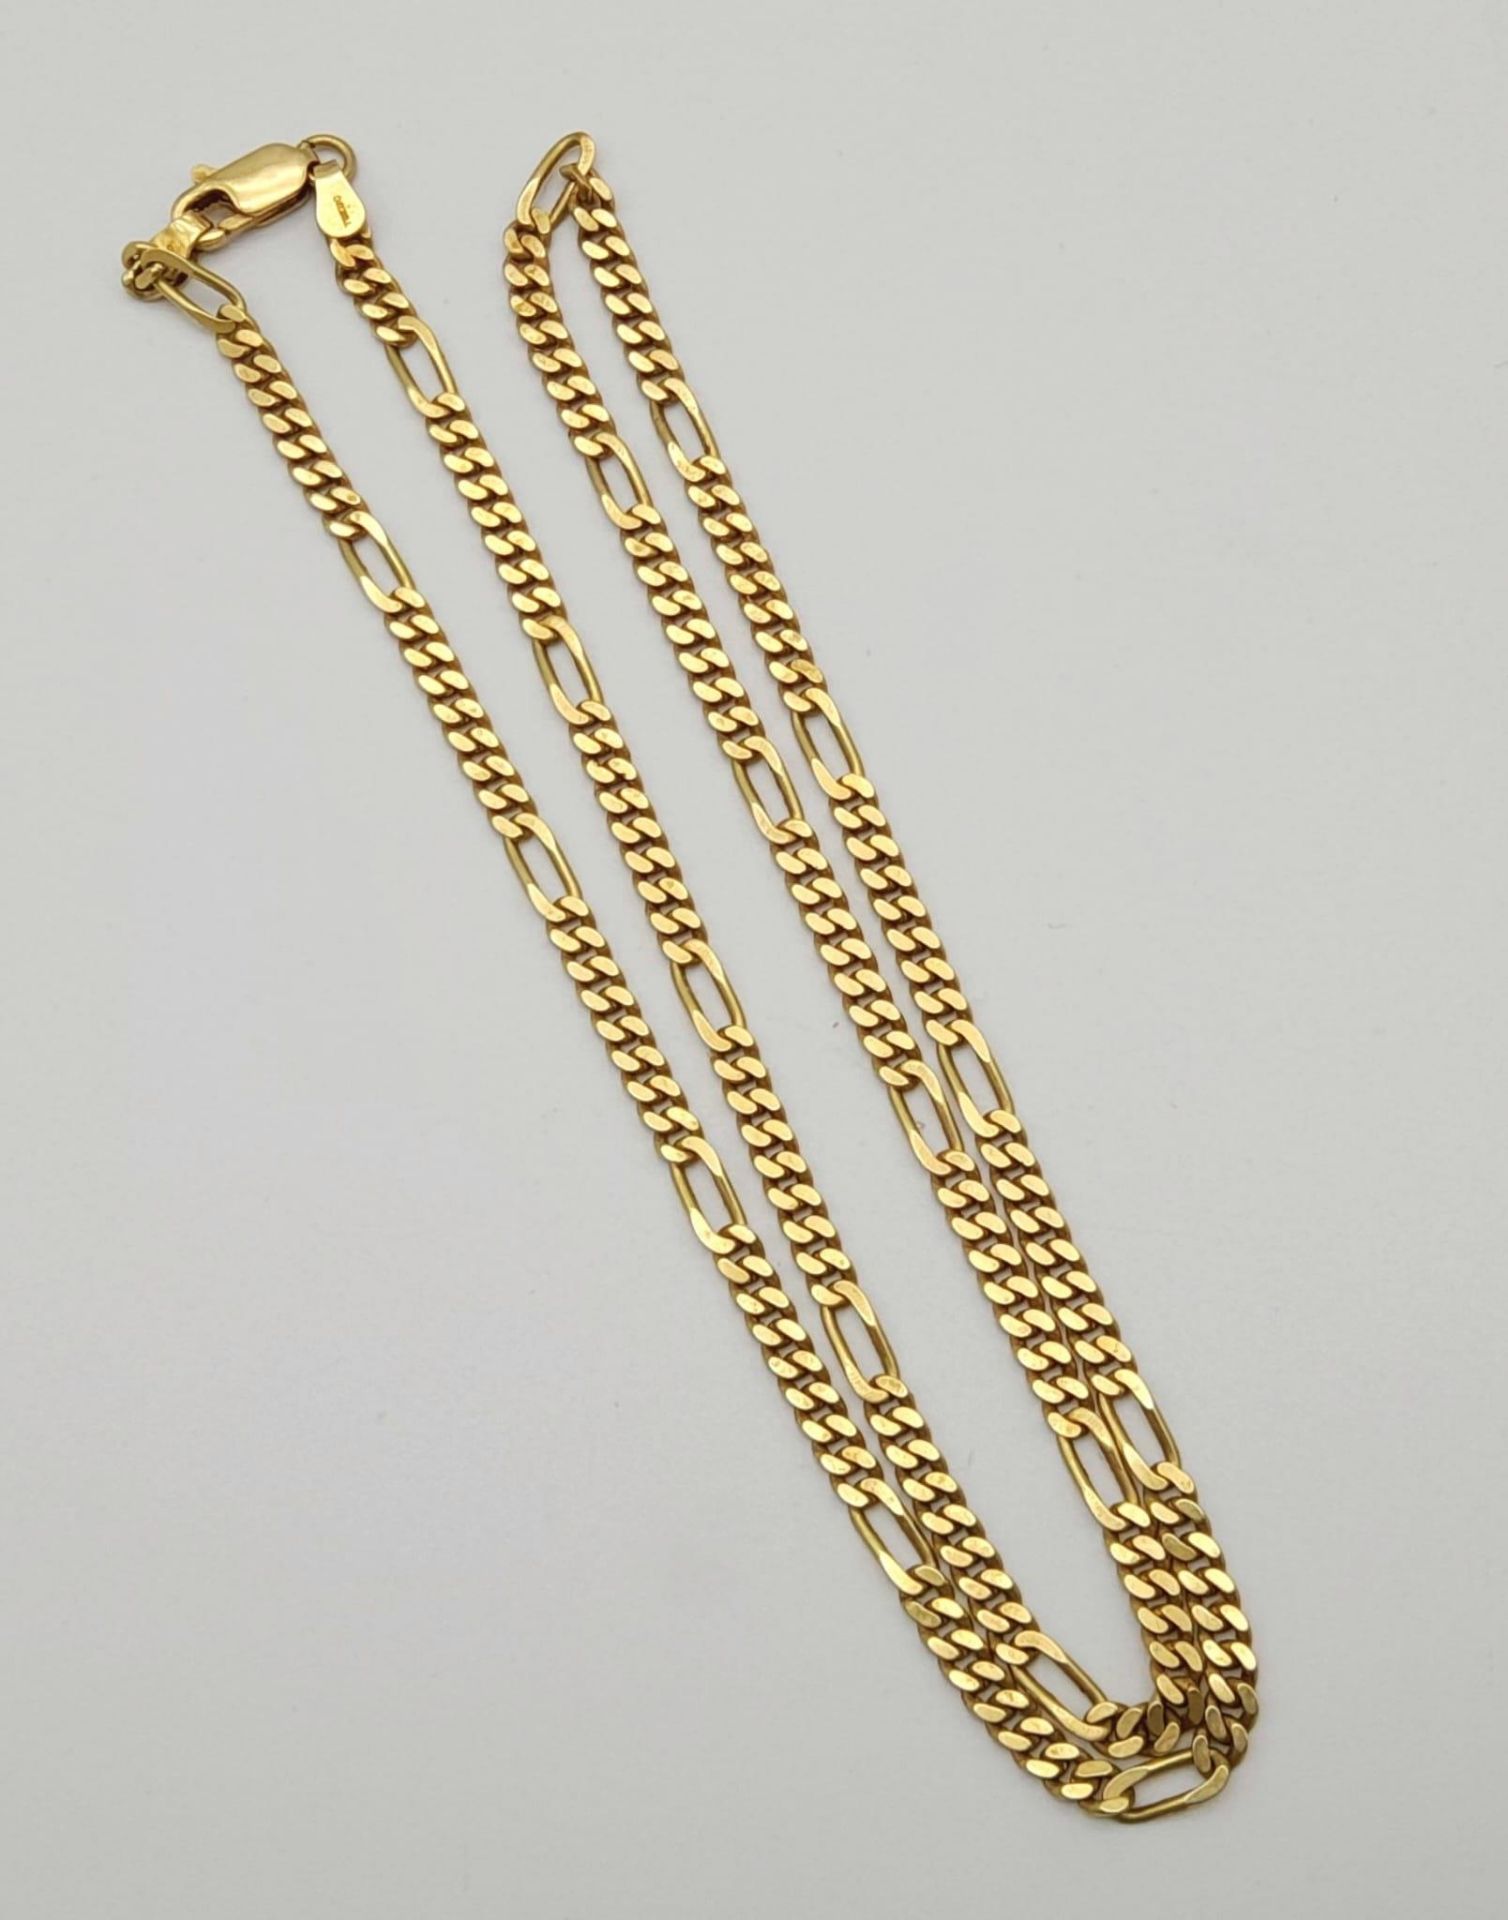 A Vintage 9K Yellow Gold Figaro Link Chain/Necklace. 52cm. 18.43g.